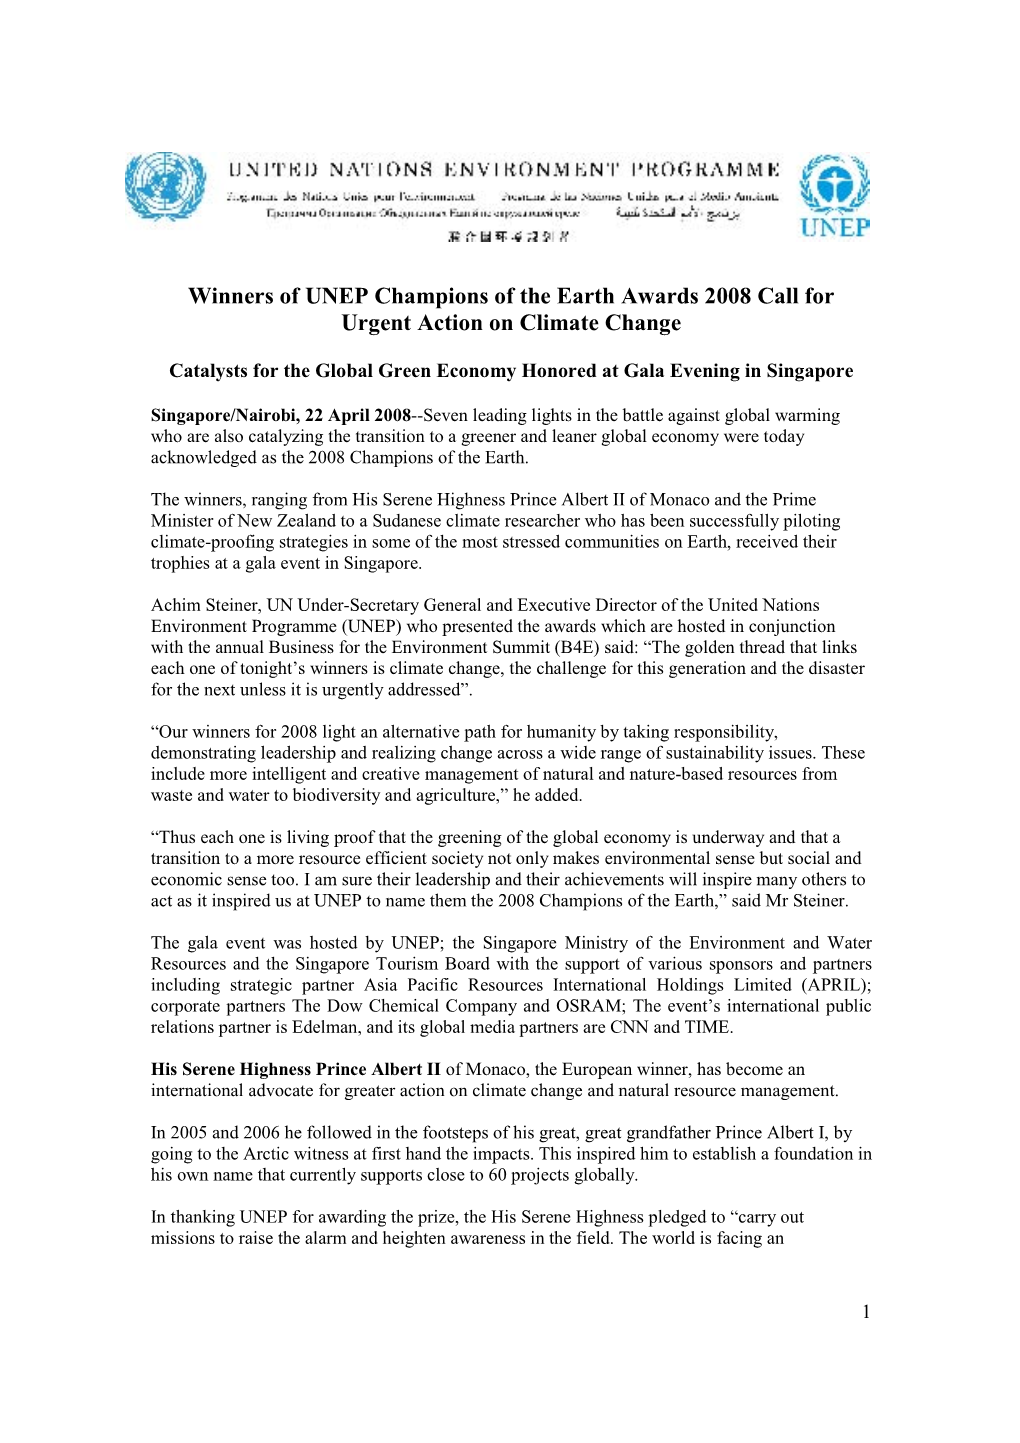 Winners of UNEP Champions of the Earth Awards 2008 Call for Urgent